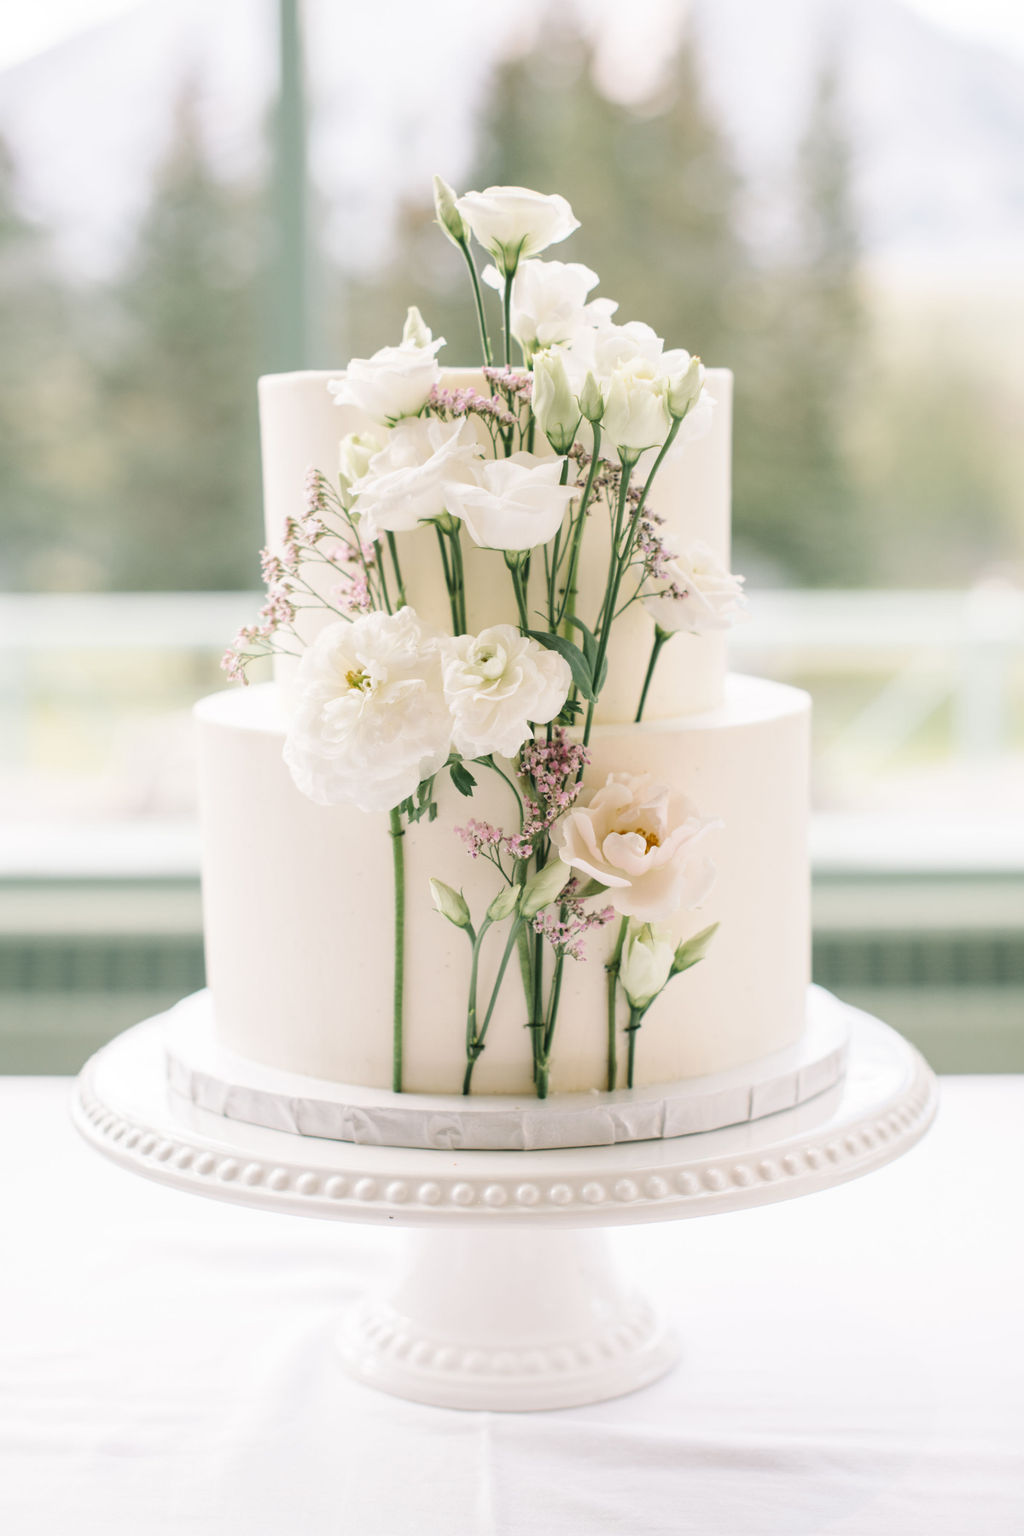 Classic two-tiered white wedding cake by Pretty Sweet YYC decorated with delicate white and pink florals. Simple and elegant summer wedding cake inspiration. 